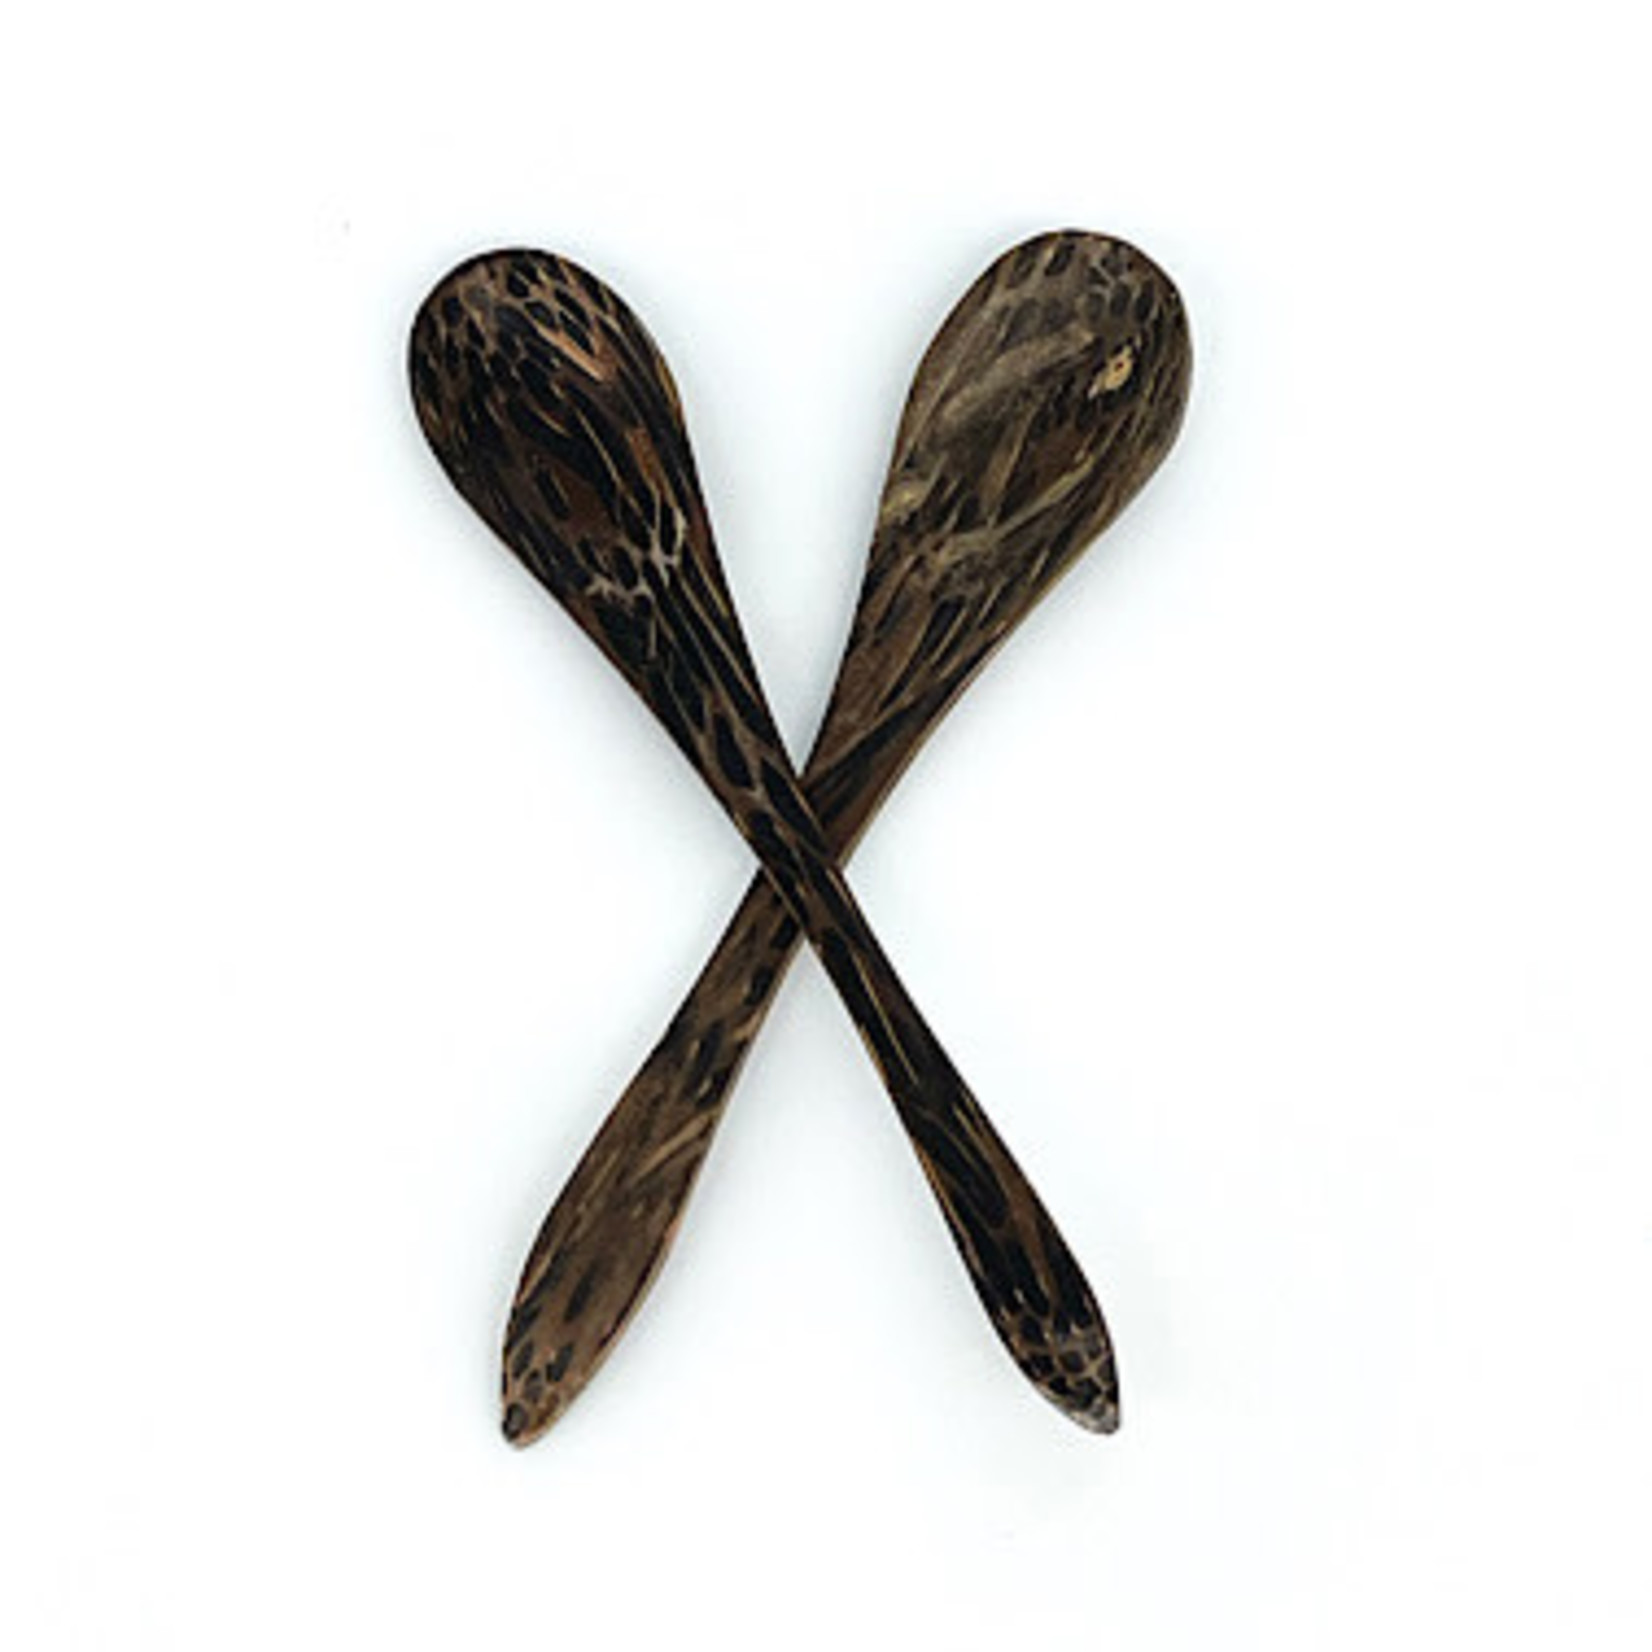 Spoon #8 Hand Carved Tiny Palm Wood Spoon, Set of 10